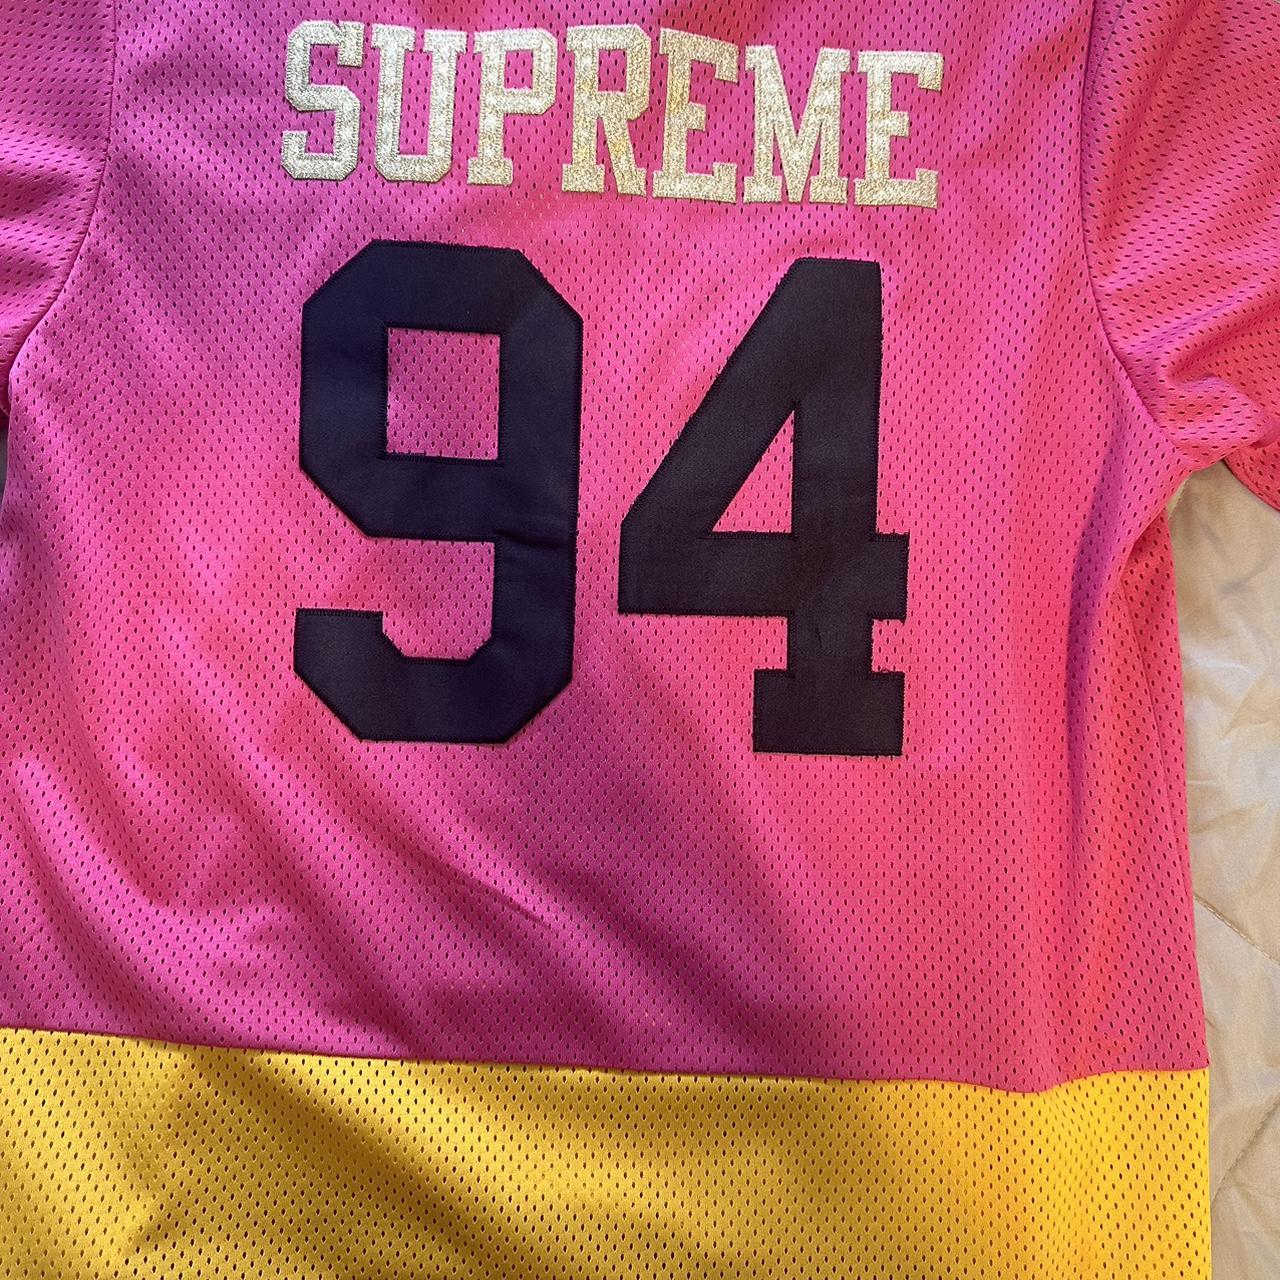 Supreme “freaky” hockey jersey - Condition 9/10 - Depop